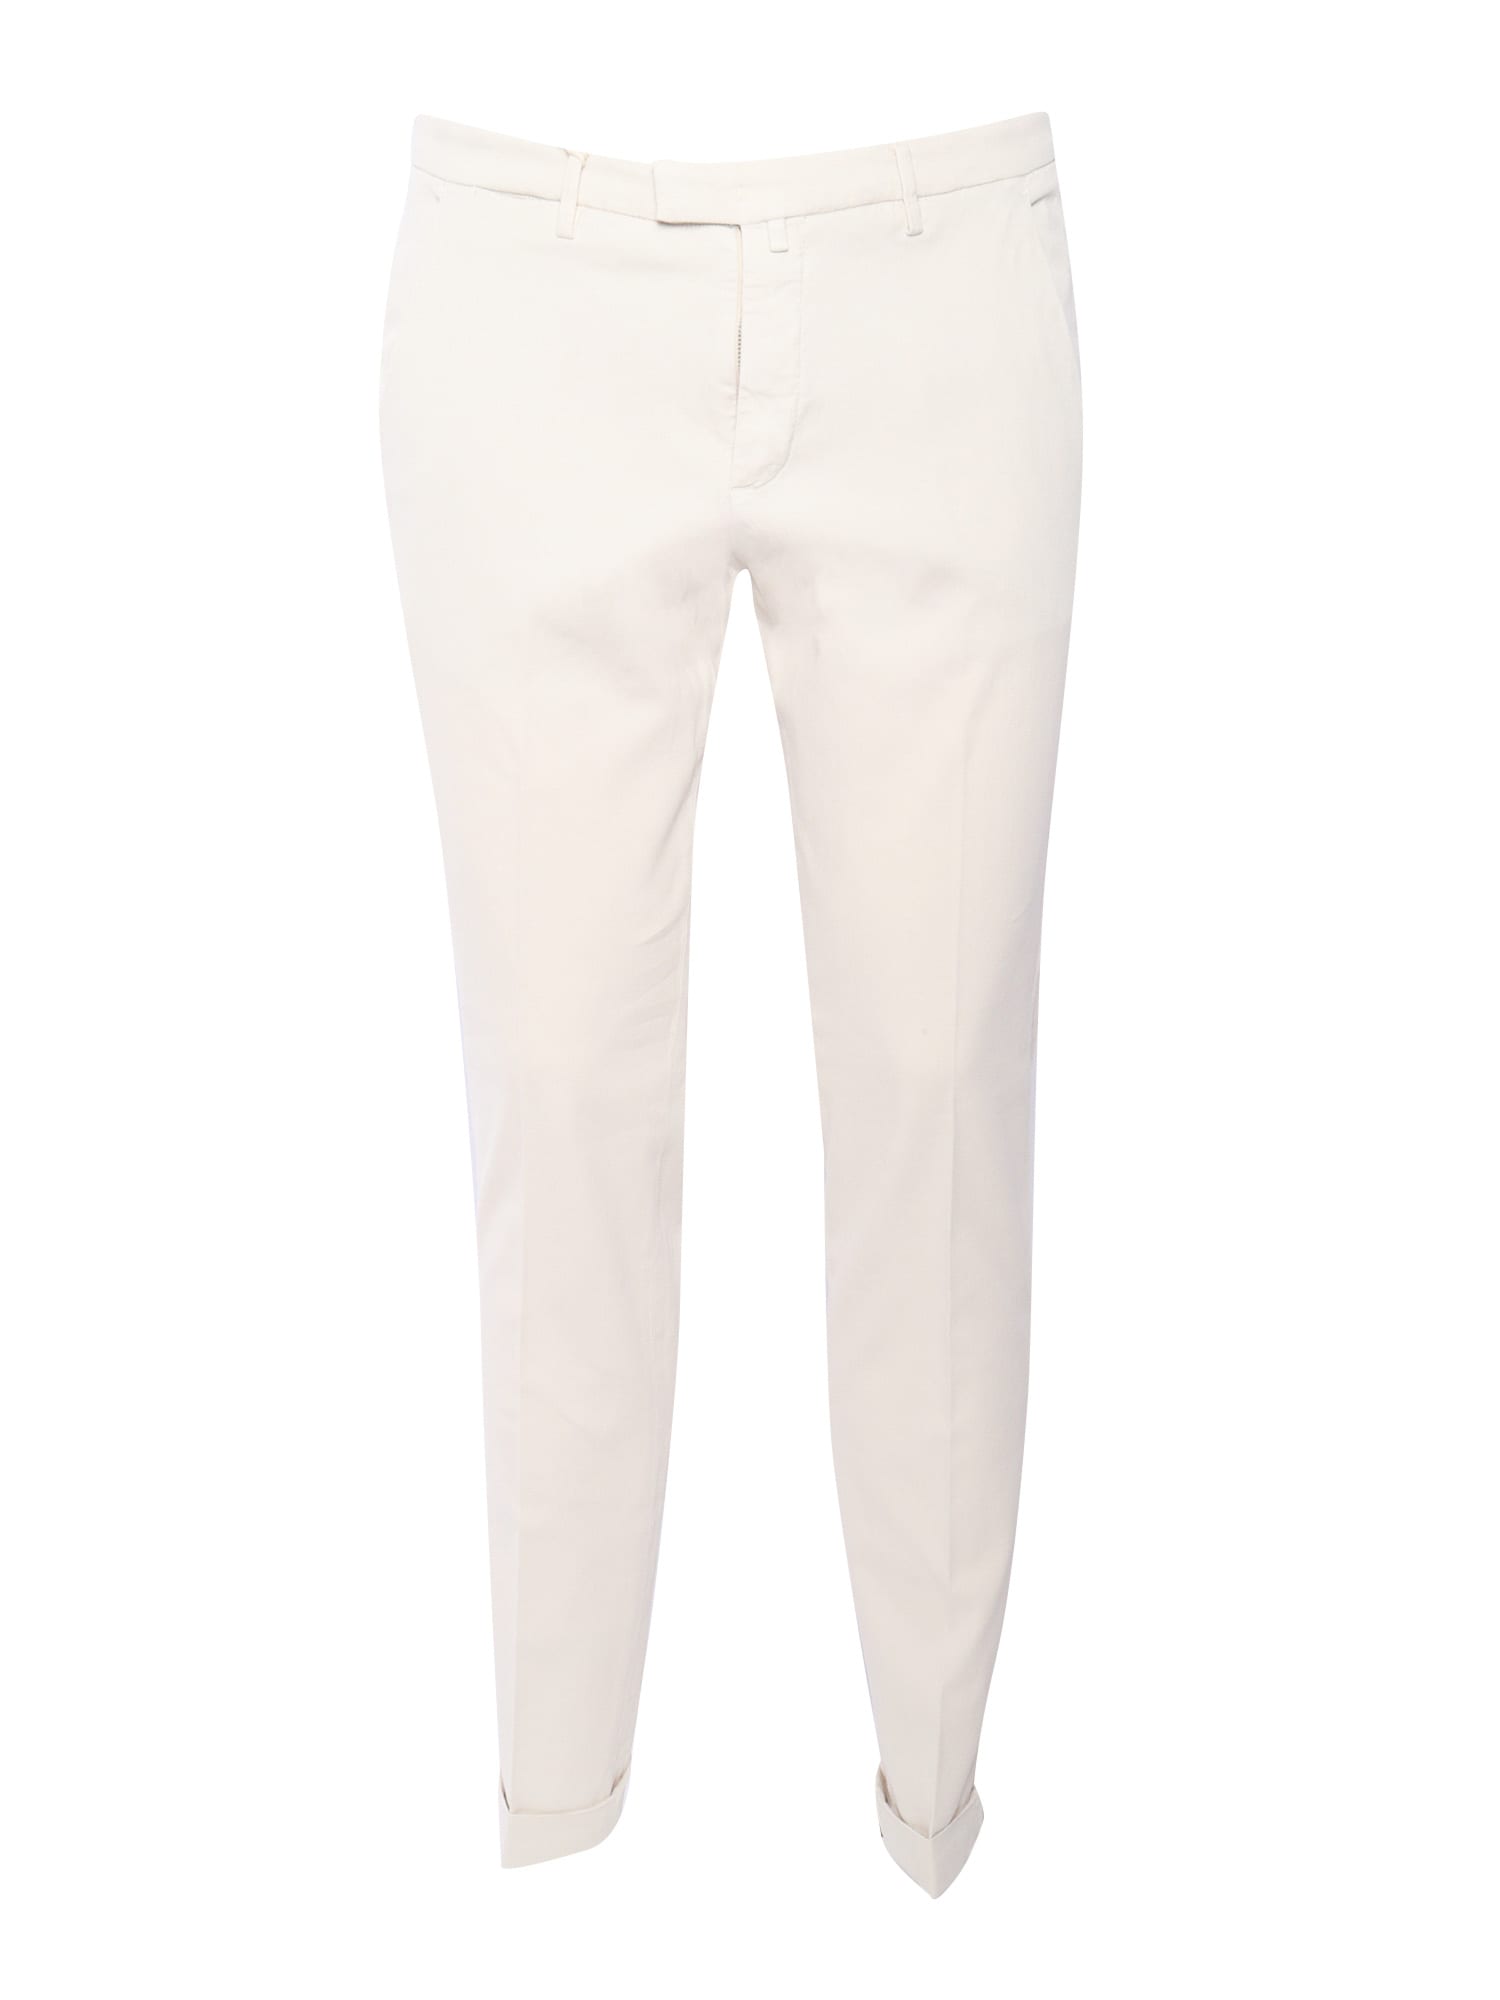 1949 White Trousers